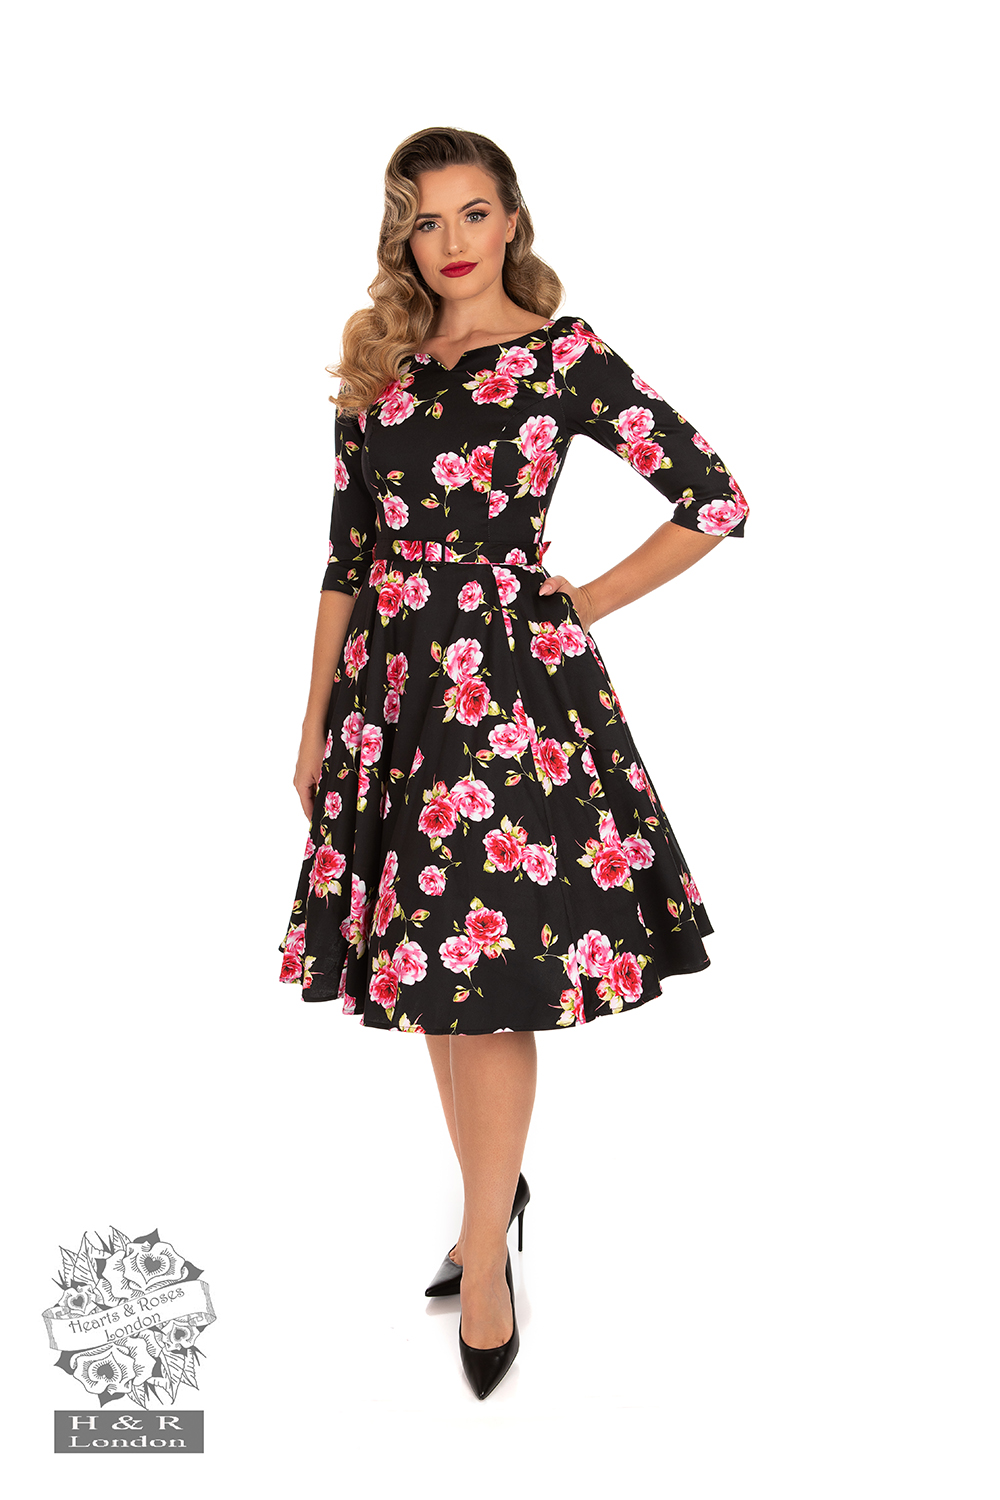 Hearts & Roses Ava Floral Swing Dress